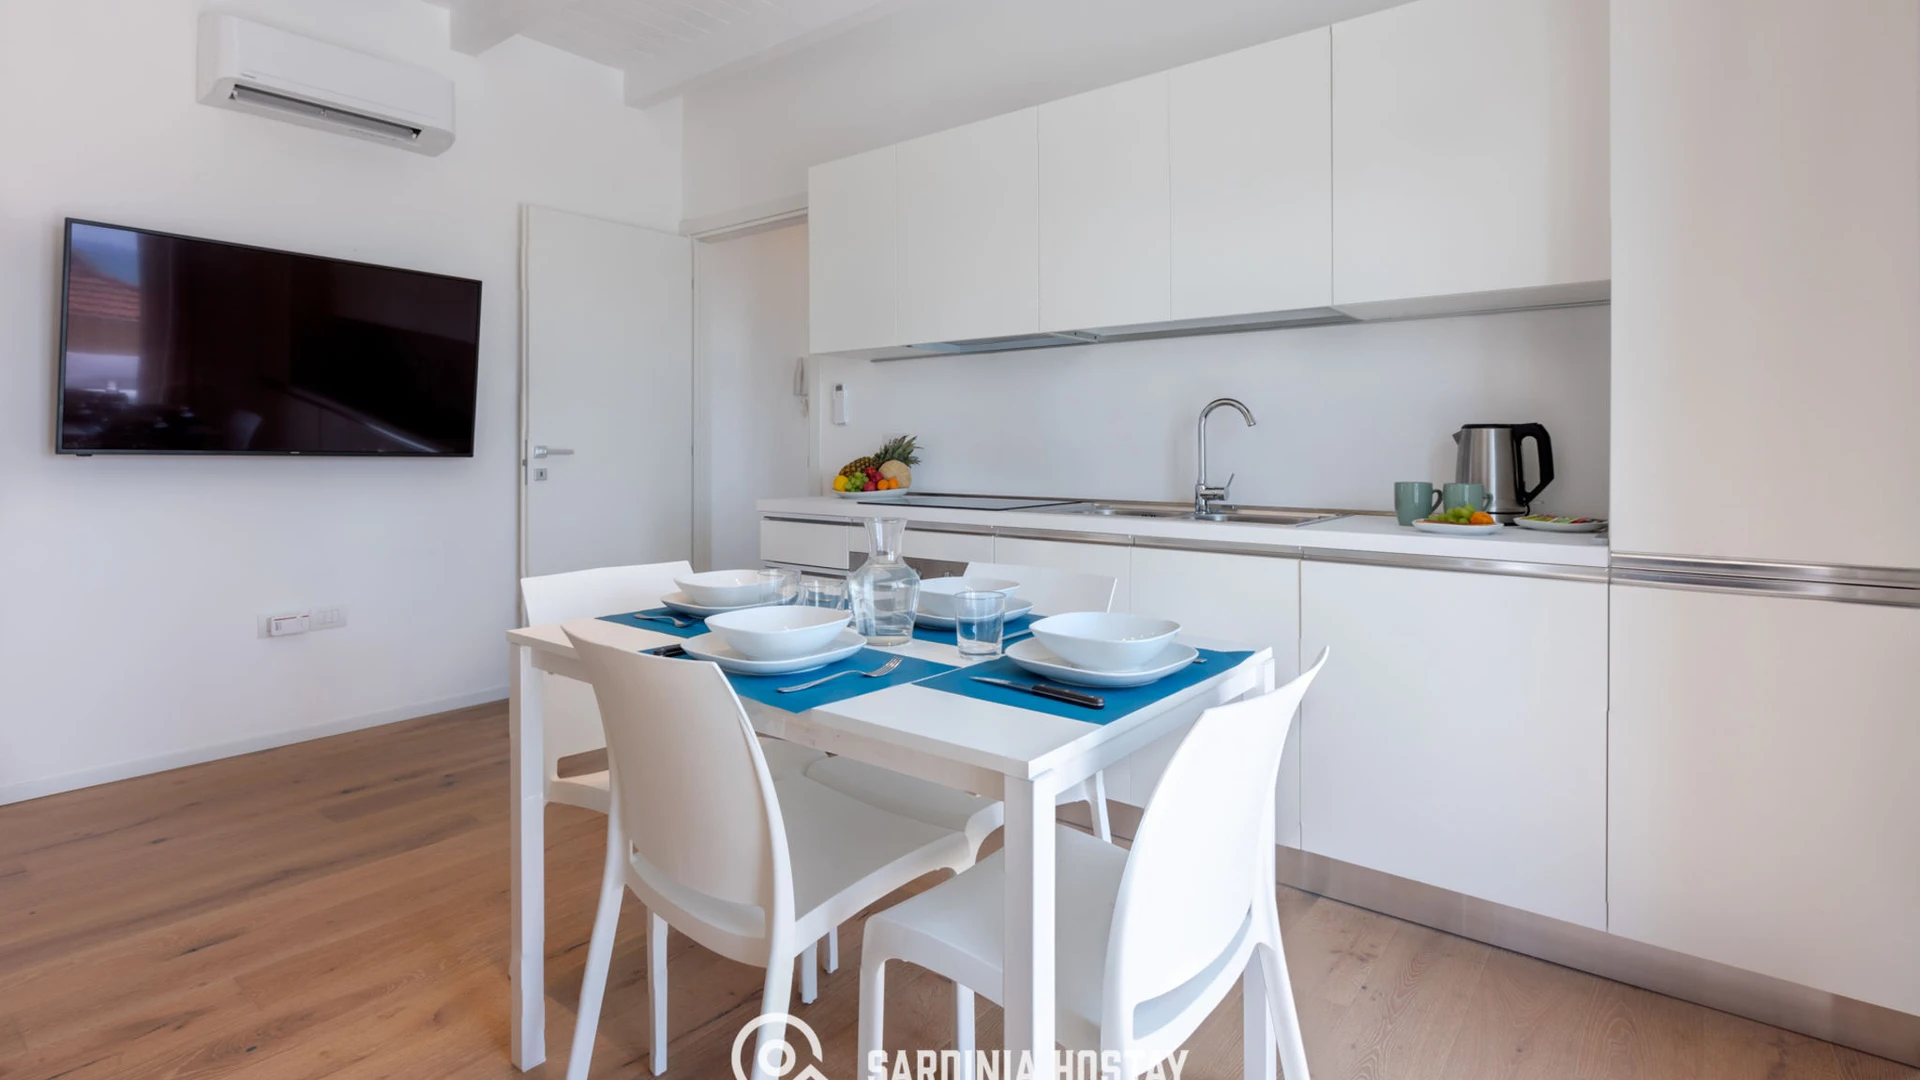 Accommodation with 3 bedrooms in Casteddu/cagliari